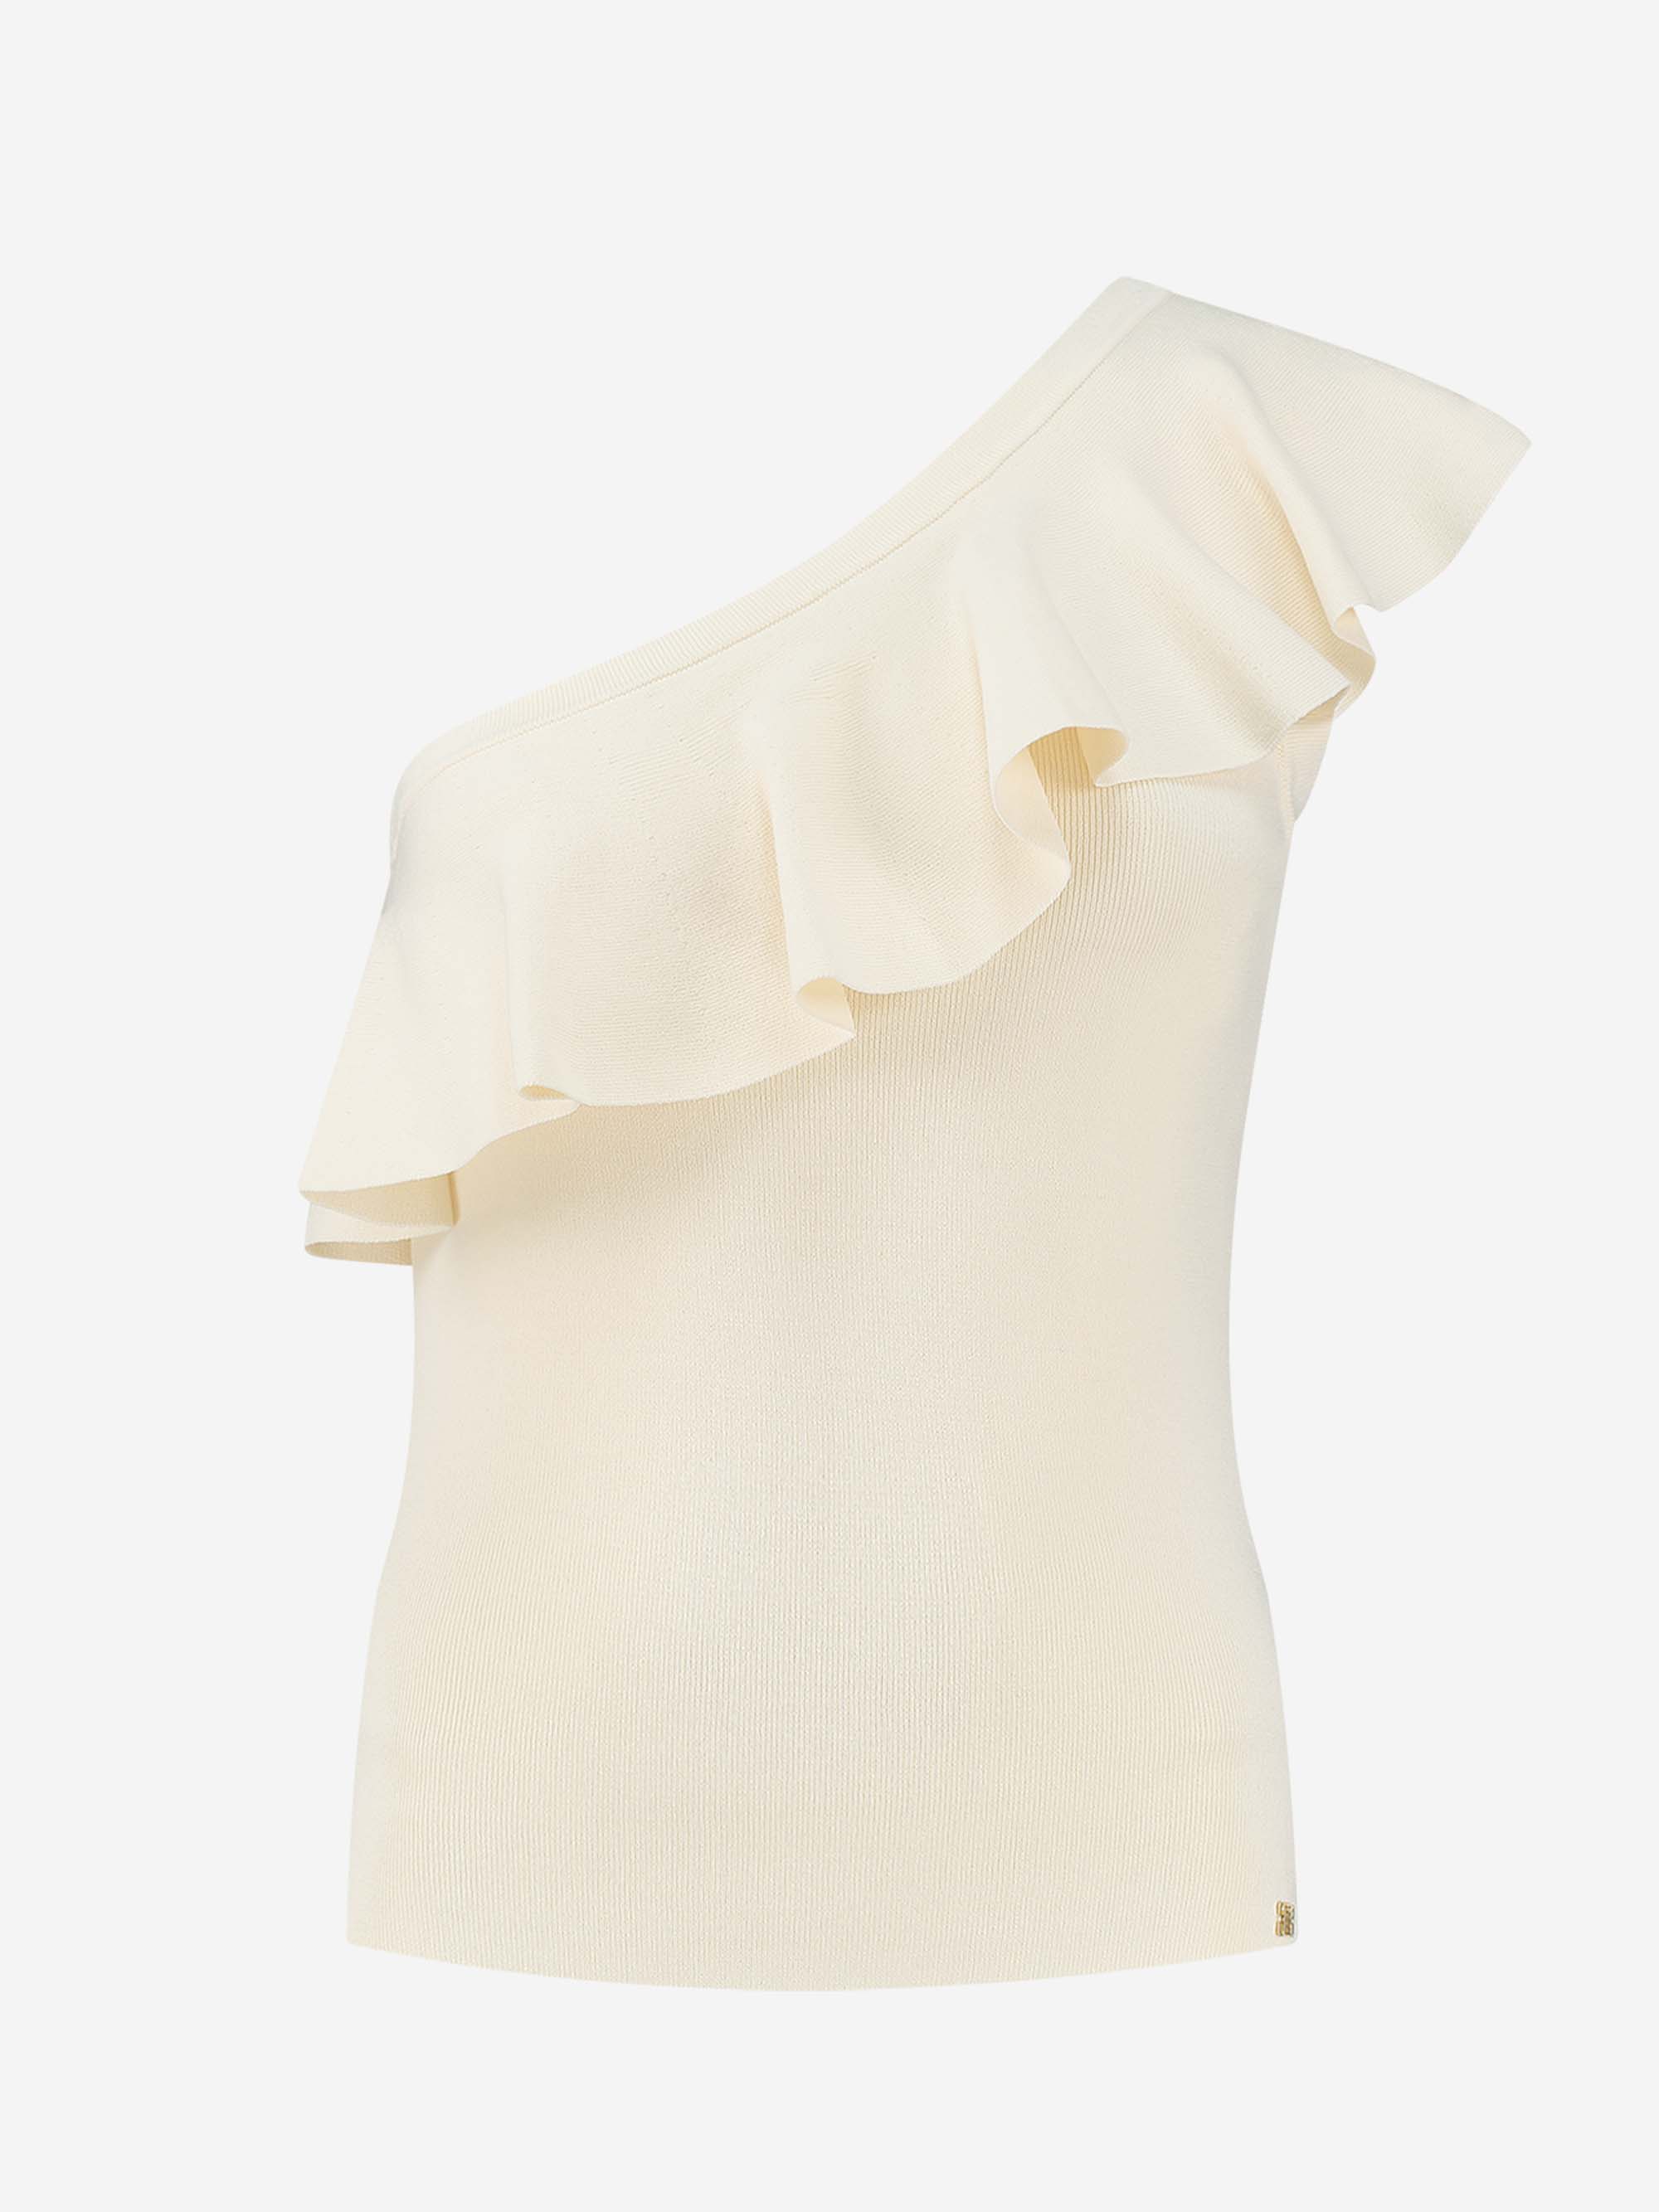 Fitted one-shoulder top with ruffles